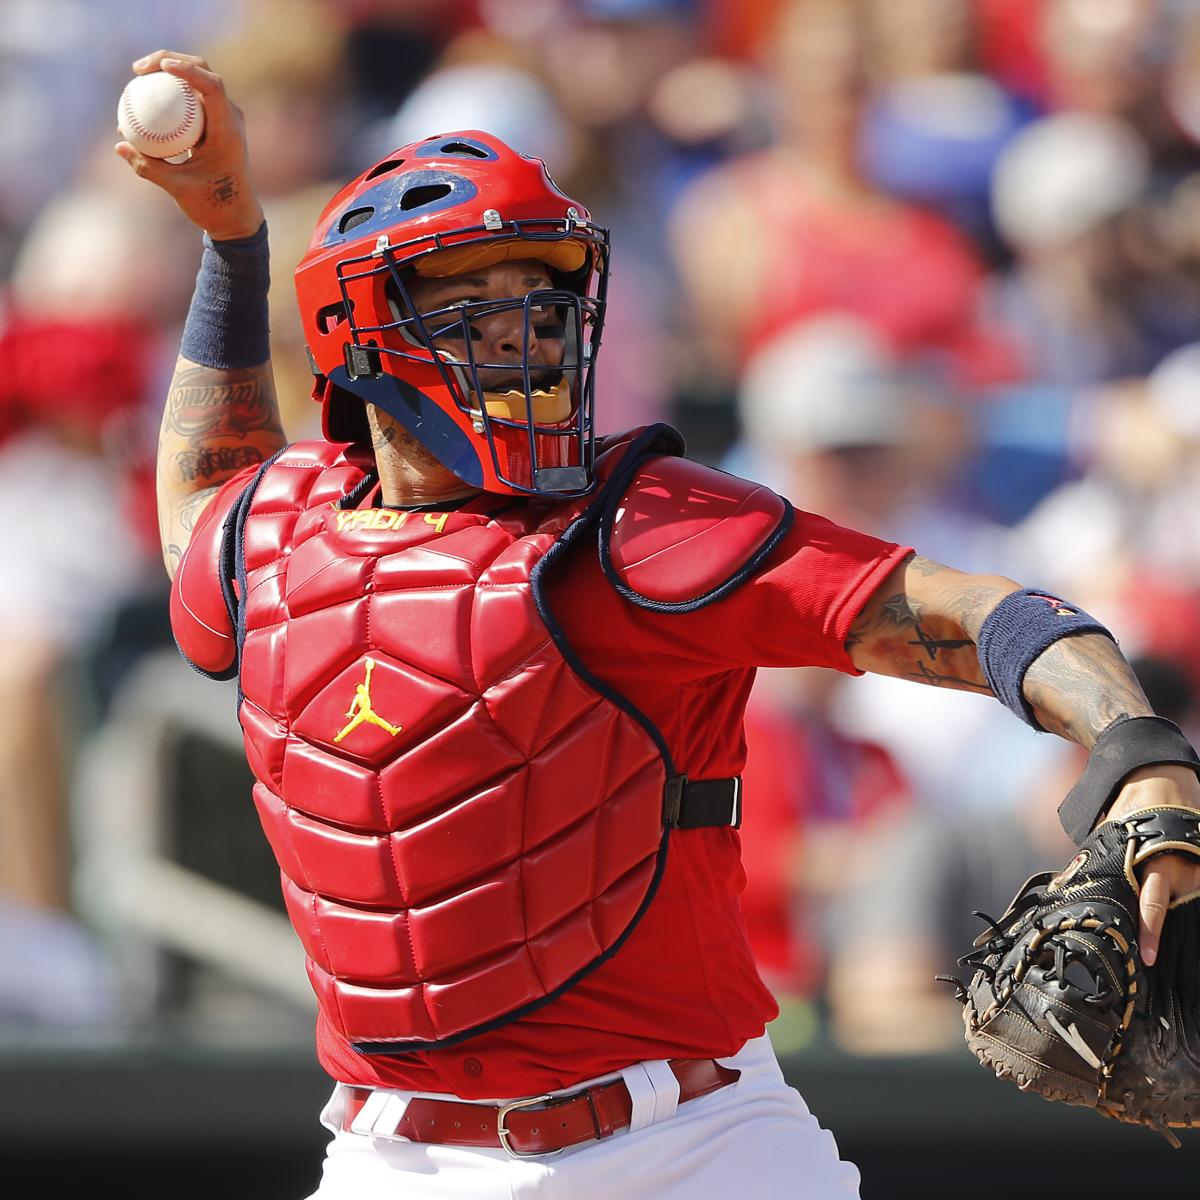 Cardinals' Yadier Molina Says He Wants to Be Seen as Best Catcher